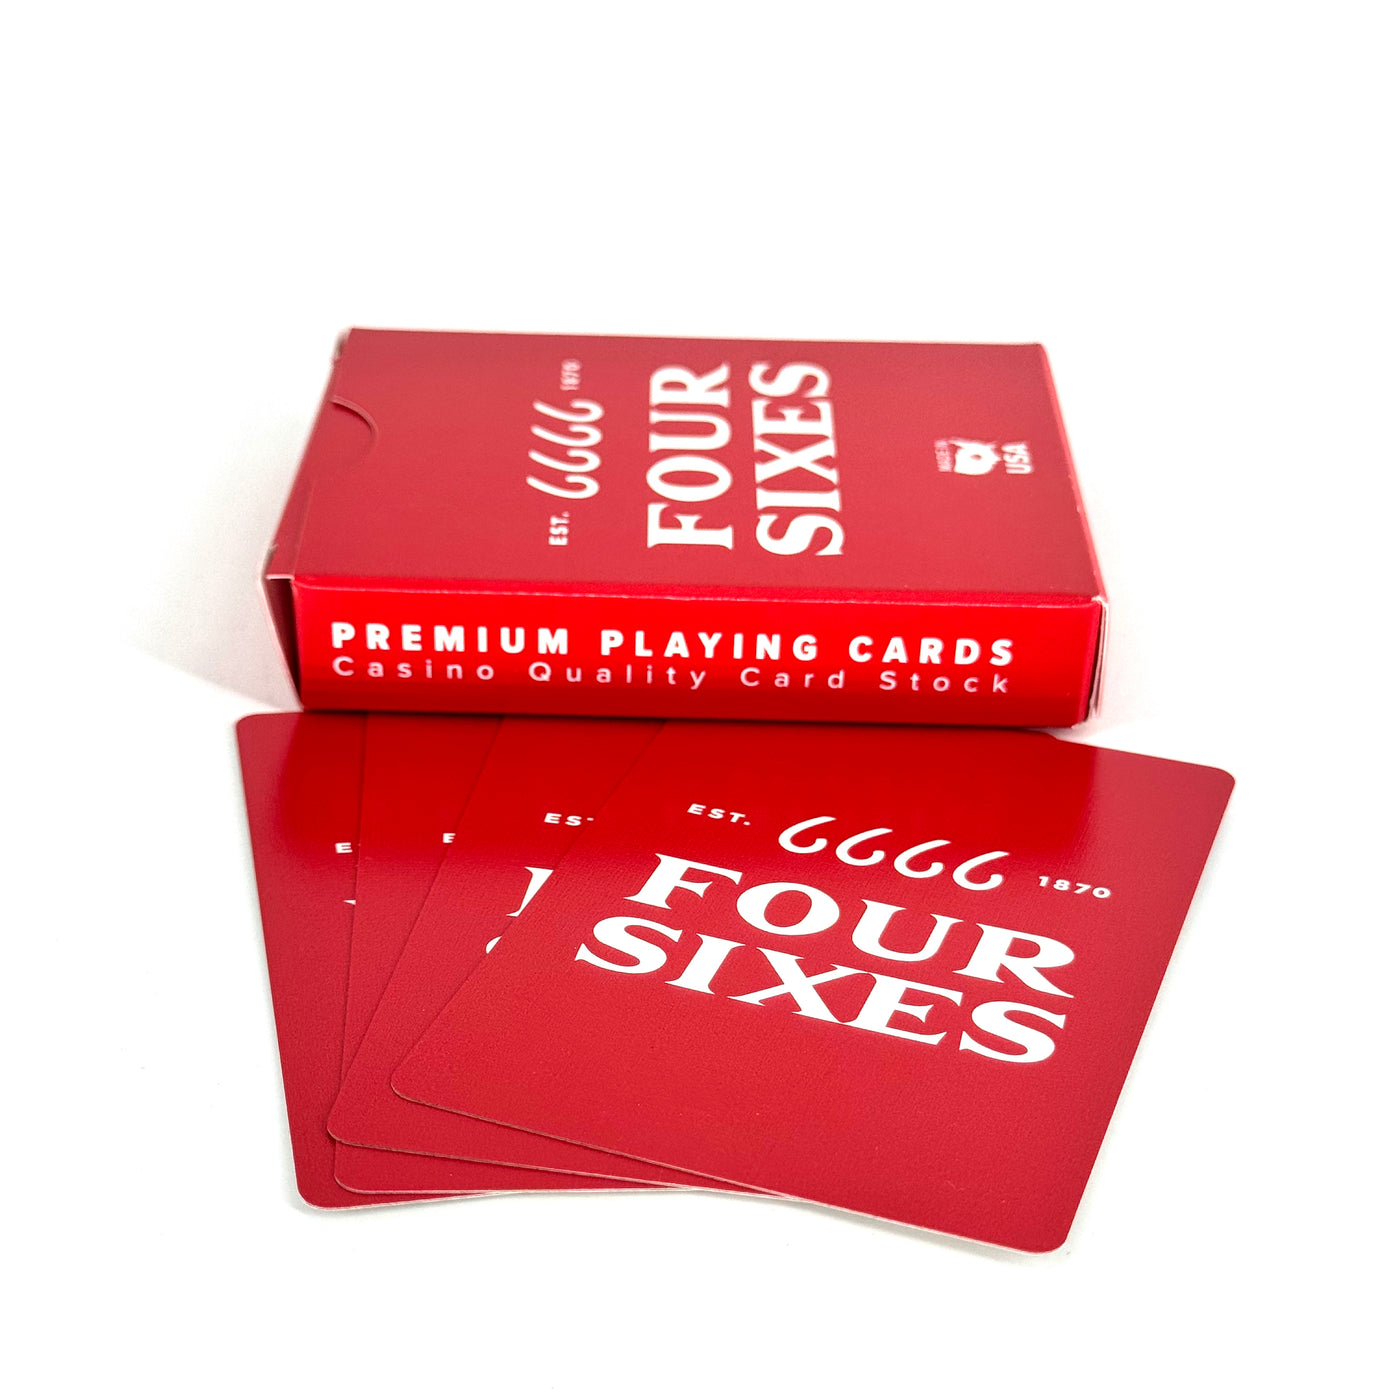 Four Sixes Playing Cards